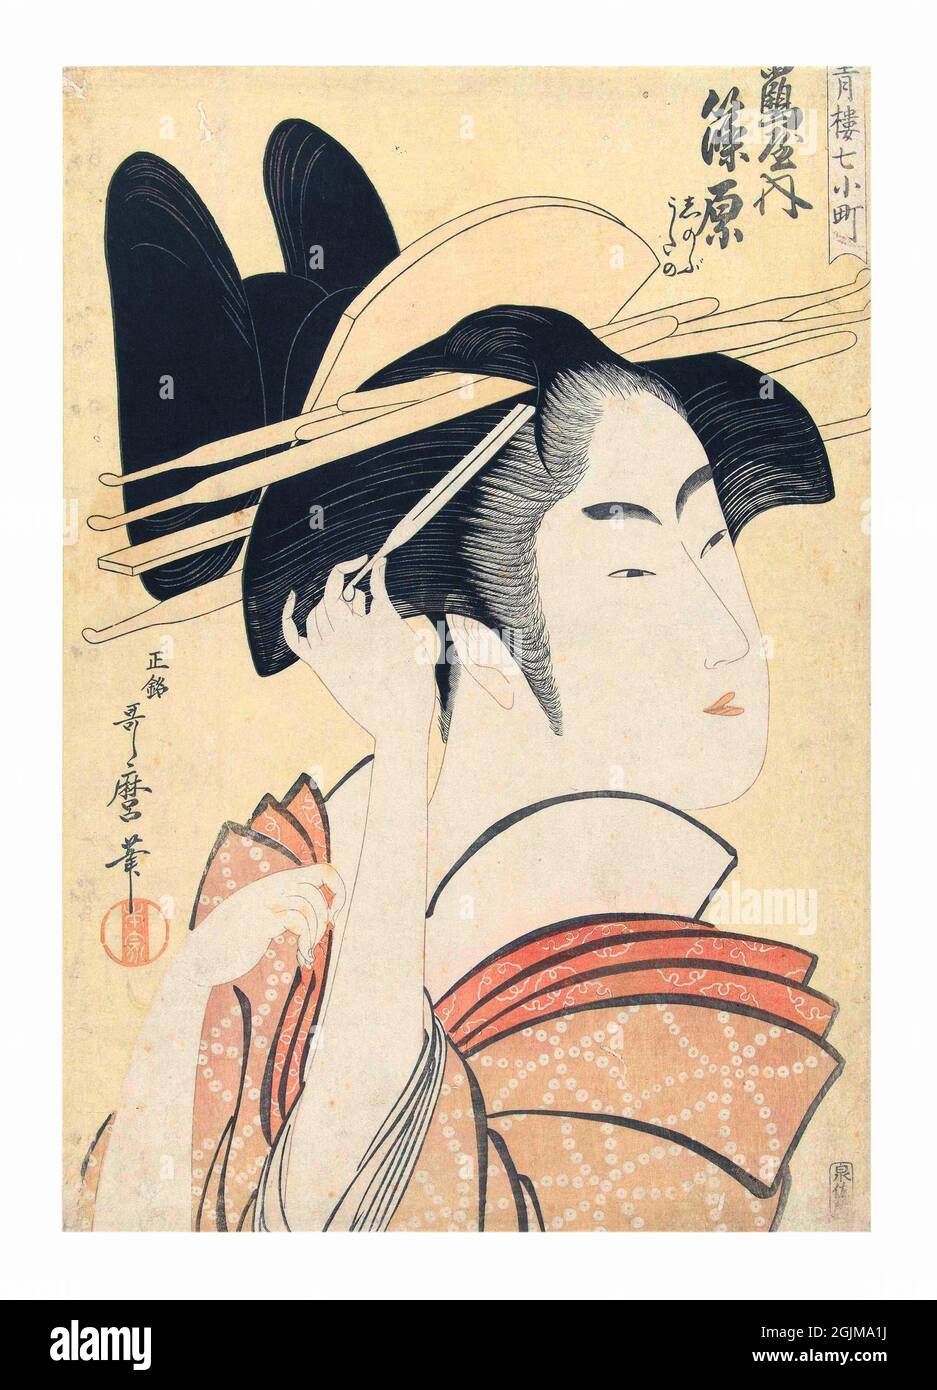 Digitally optimised eighteenth / nineteenth century Japanese woodcut illustration.  Portrait of the courtesan Shinowara from the Tsuruya house. 'The seven Komachi from the pleasure houses.' Portrait of a courtesan, sticking a pen in her hair; against yellow background. In addition to the print title, the names of her two kamuro (youngest assistants of a courtesan): Shinobu and Utano. (bijinga) Stock Photo